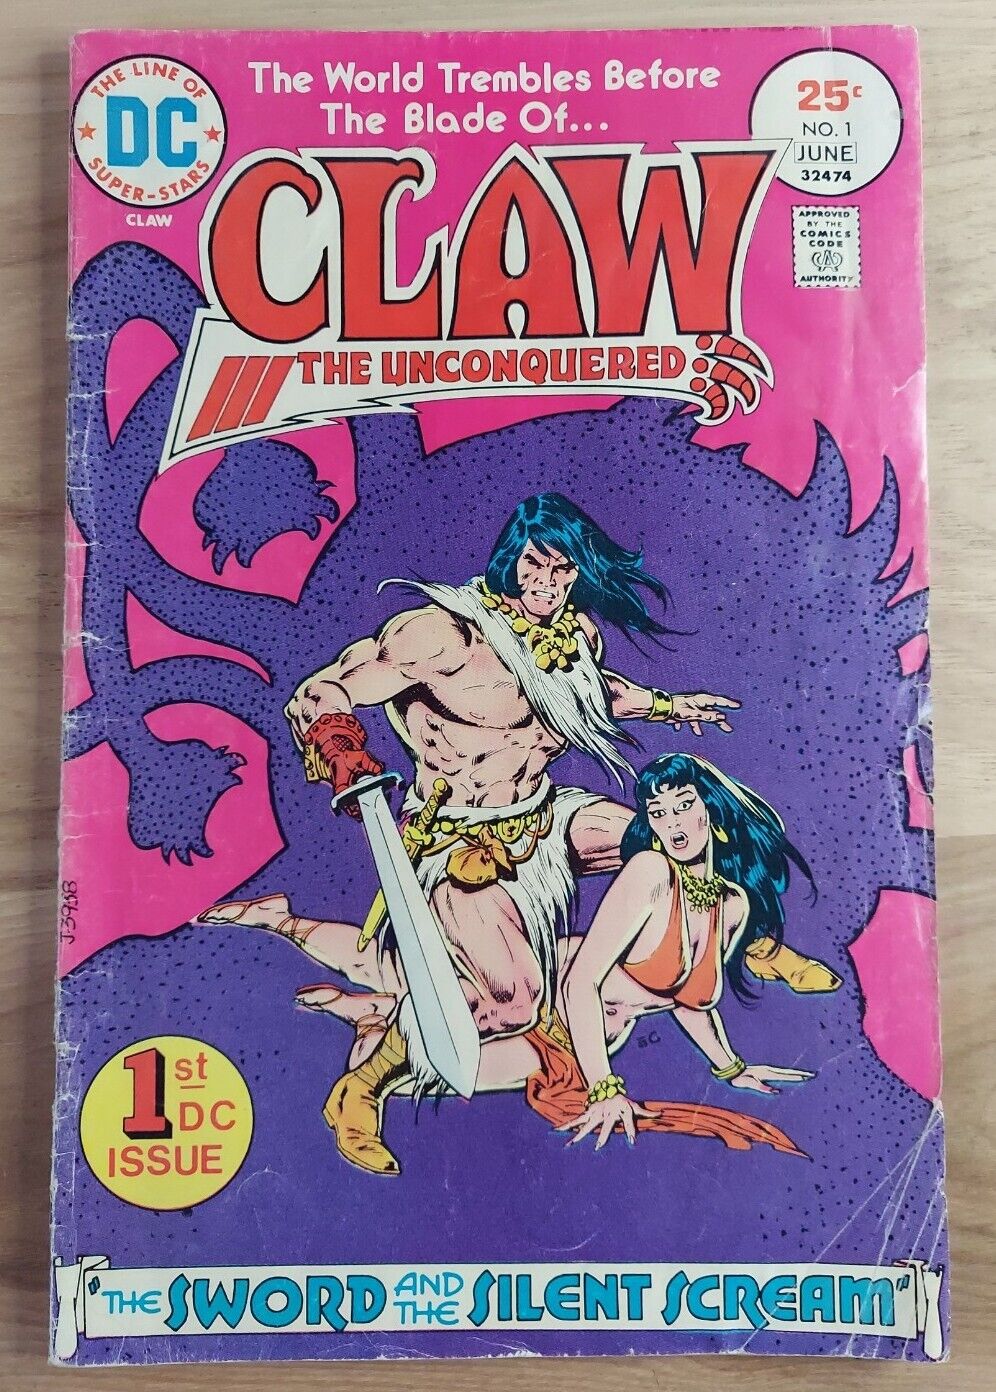 CLAW The Unconquered #1 - DC Comics 1975 - Sword & the Silent Scream - 1st App